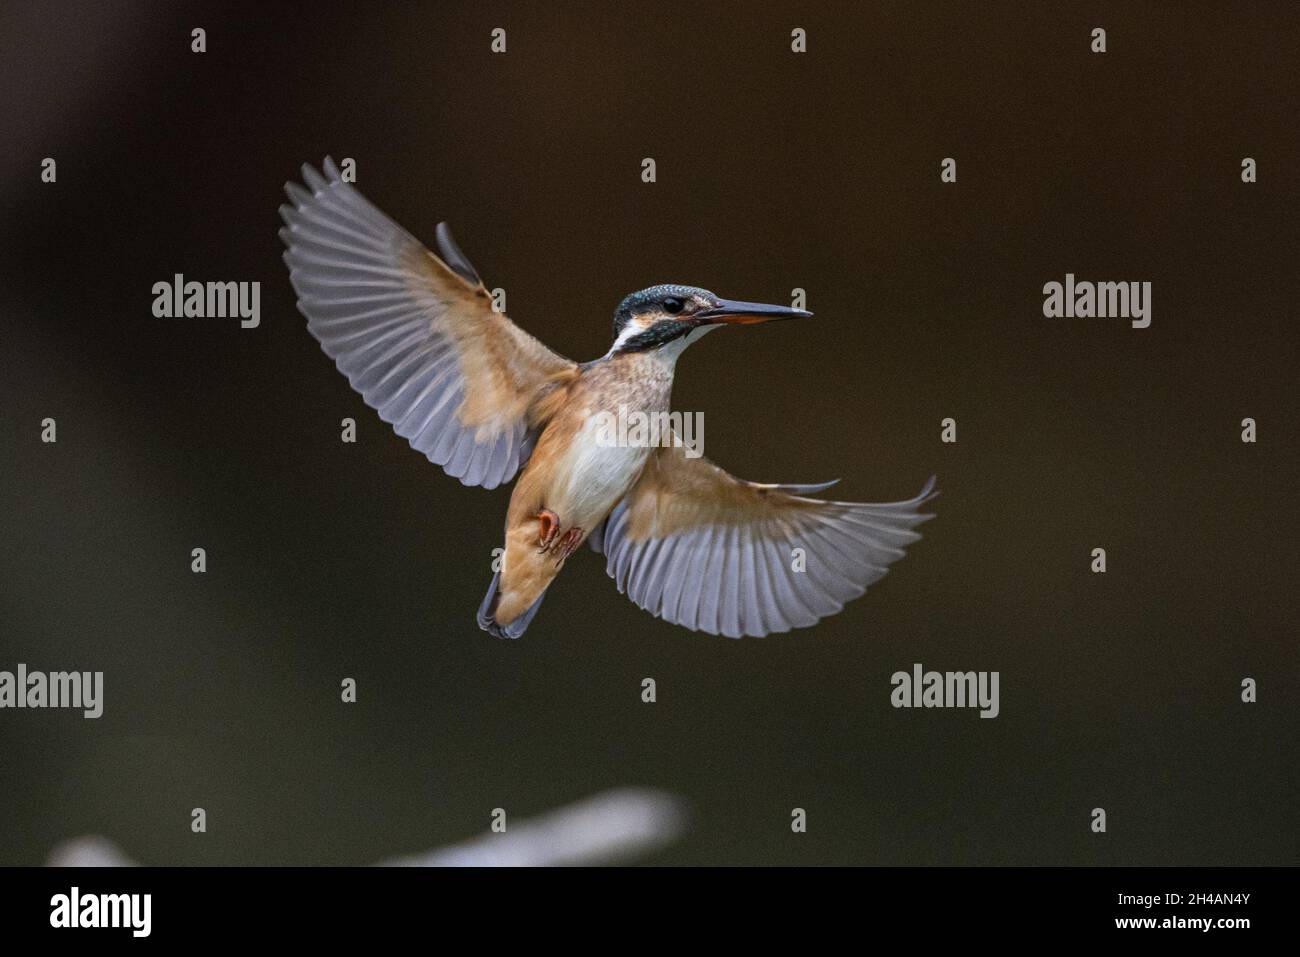 Beautiful shot of a kingfisher in motion with blurred background Stock Photo